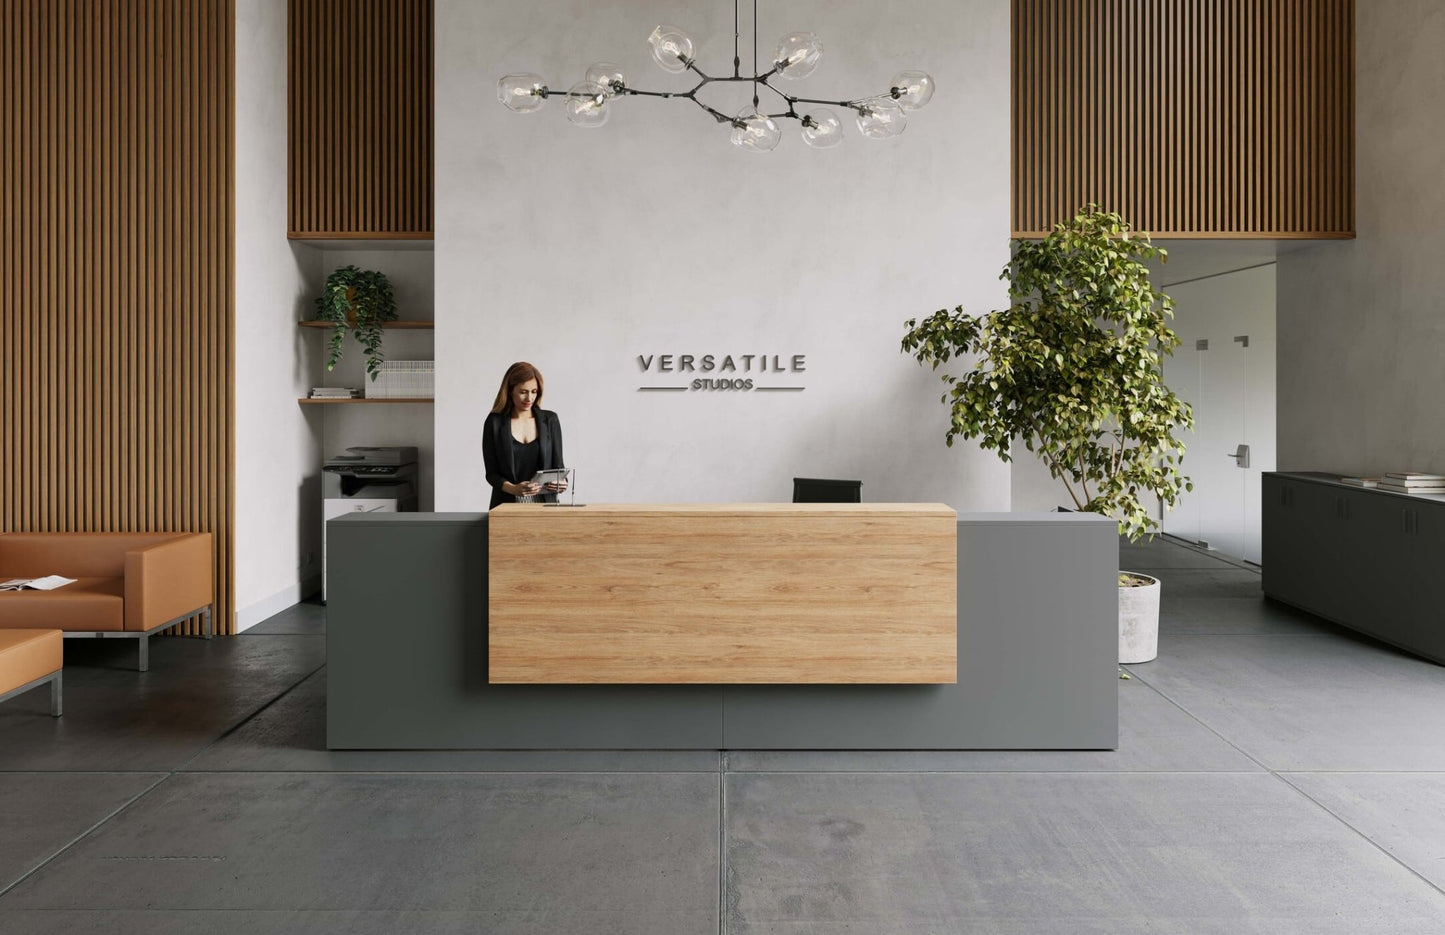 Introduce Reception Desk w/ Stacker by OFGO Studios - Wholesale Office Furniture